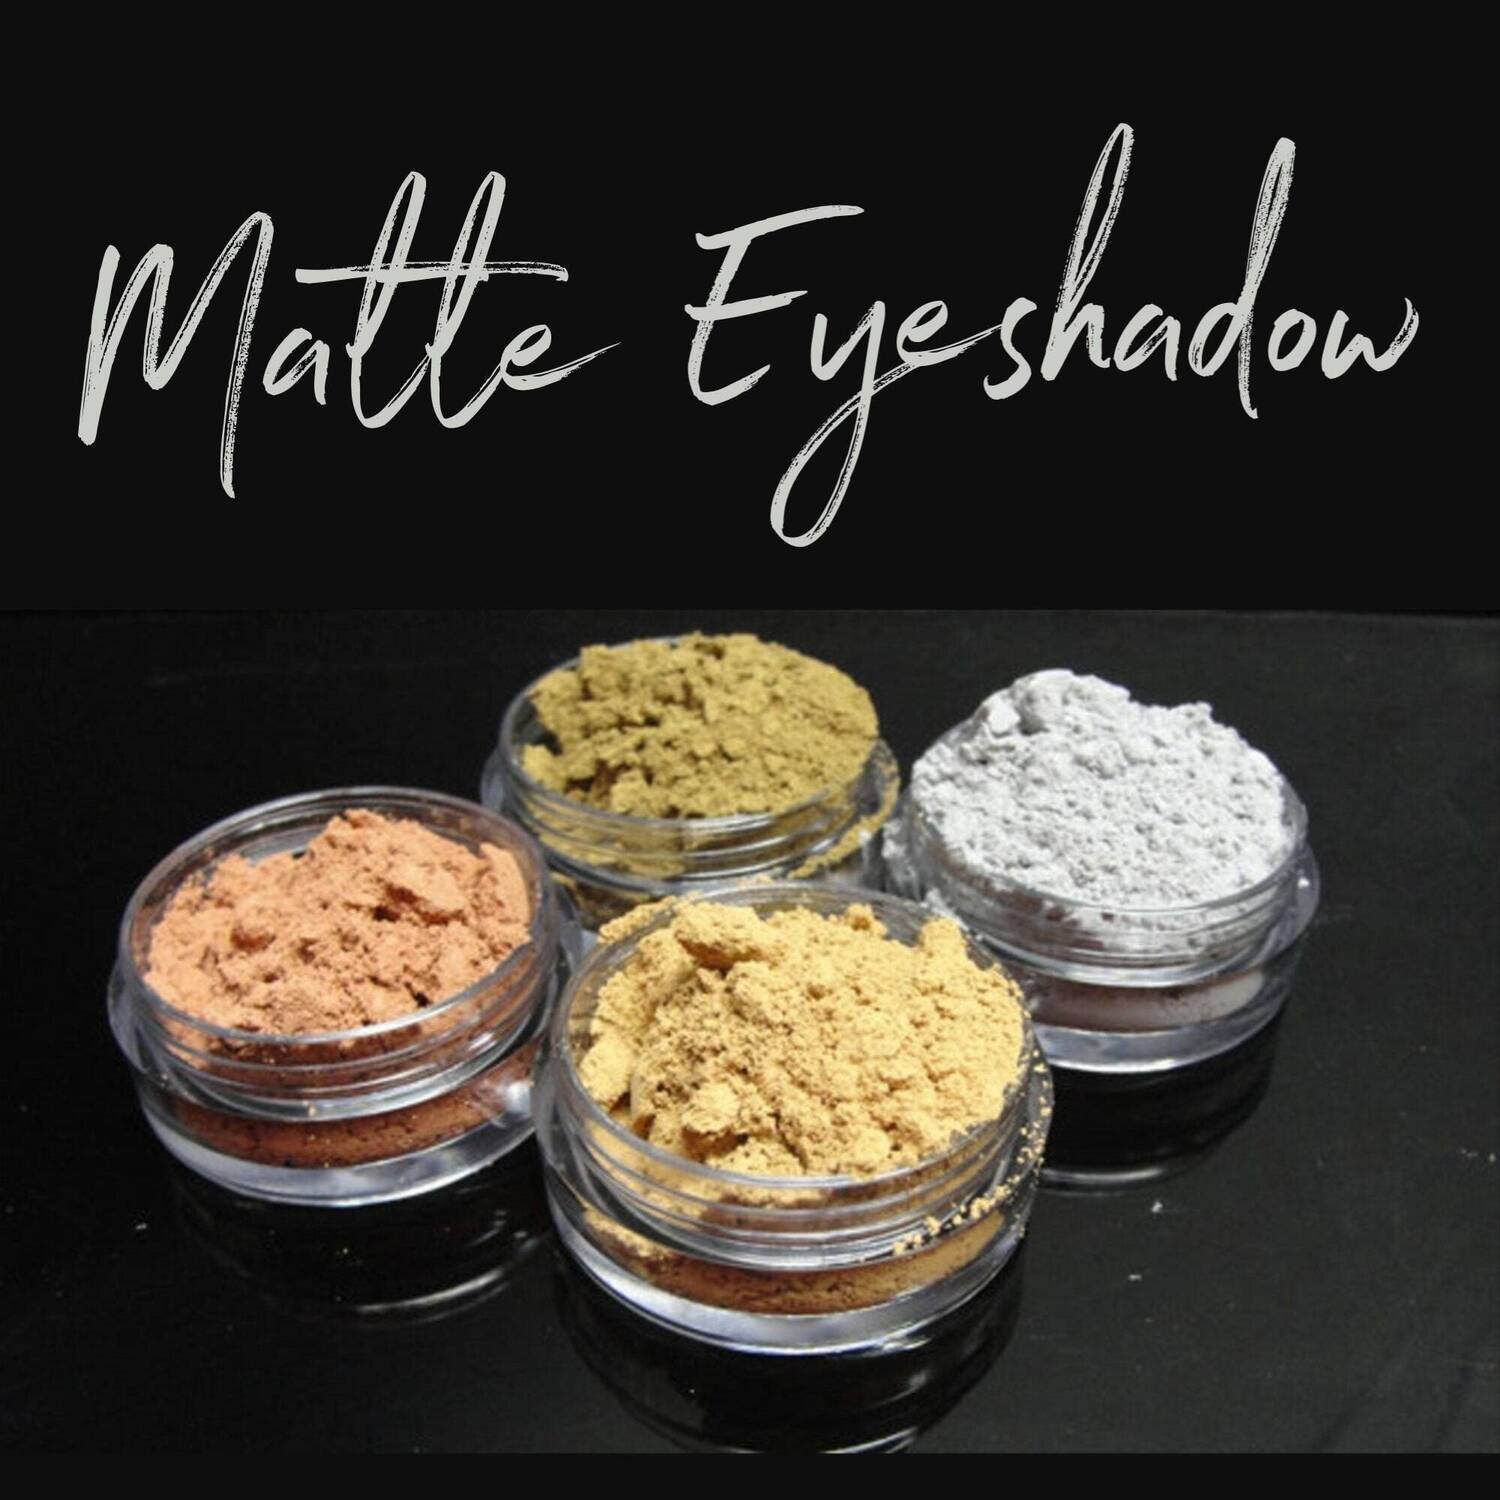 Matte Eyeshadow - No Shimmer Eyeshadow with Zero Talc, Parabens or Bismuth Oxychloride - Made in USA since 2007 - Mineral Eyeshadow